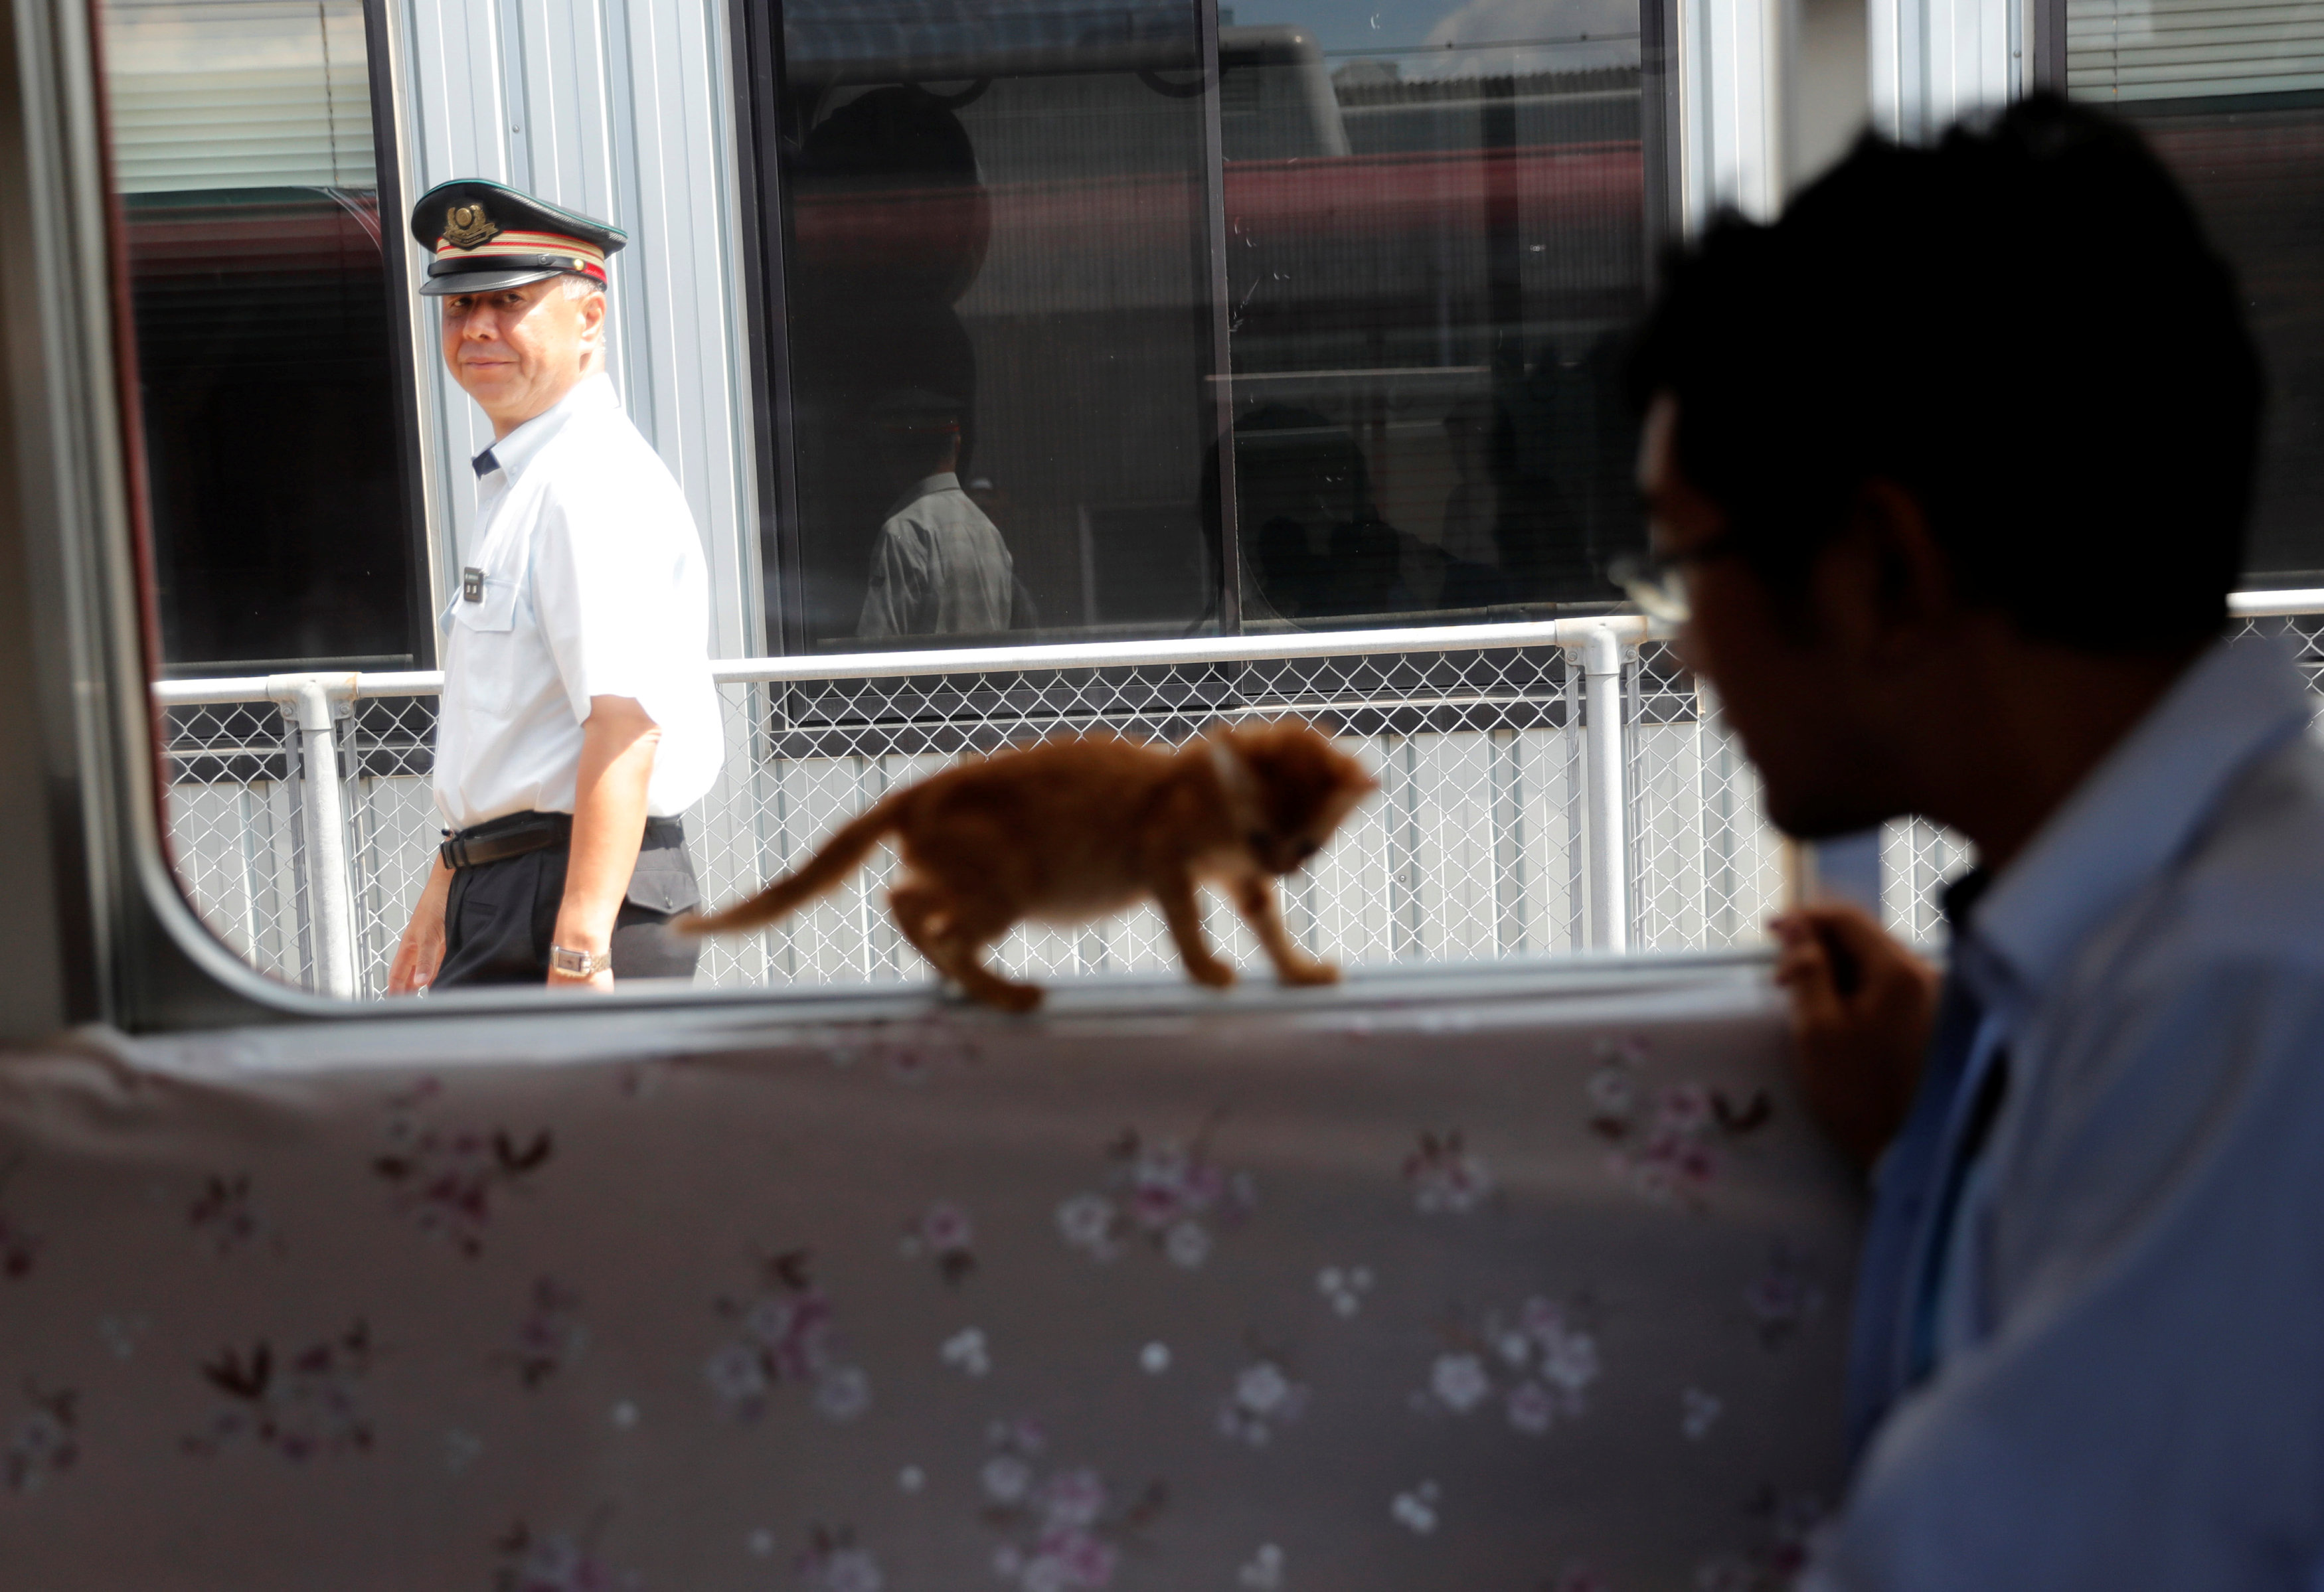 In pictures: Cats on a train in Japan